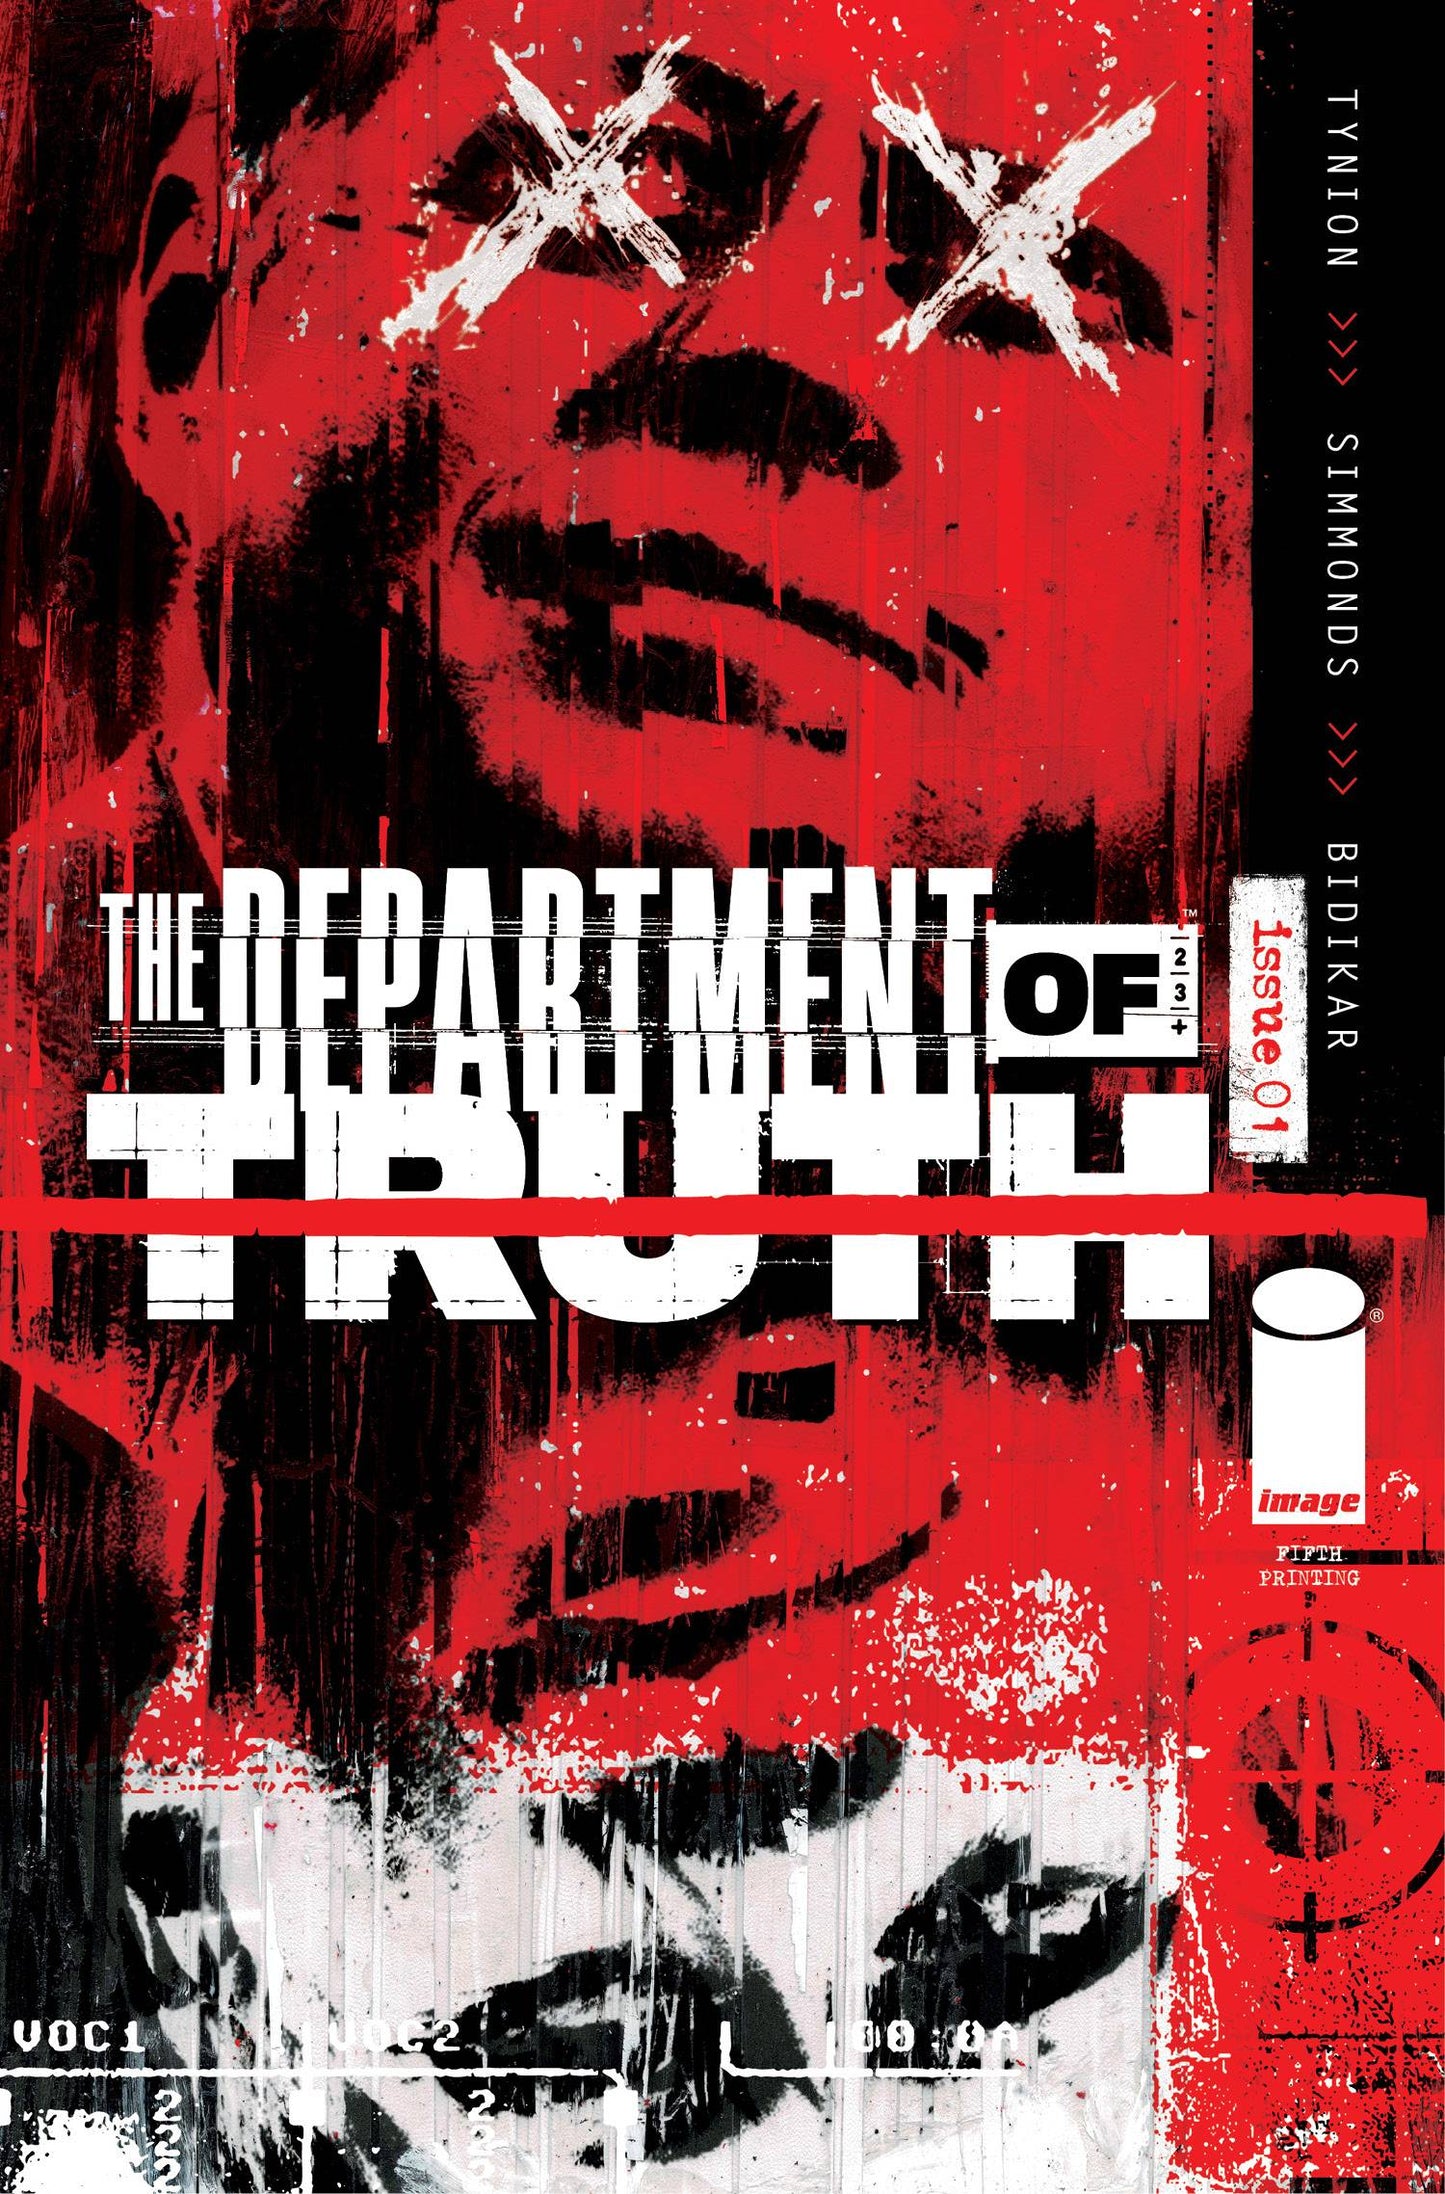 DEPARTMENT OF TRUTH #1 5TH PRINT VARIANT